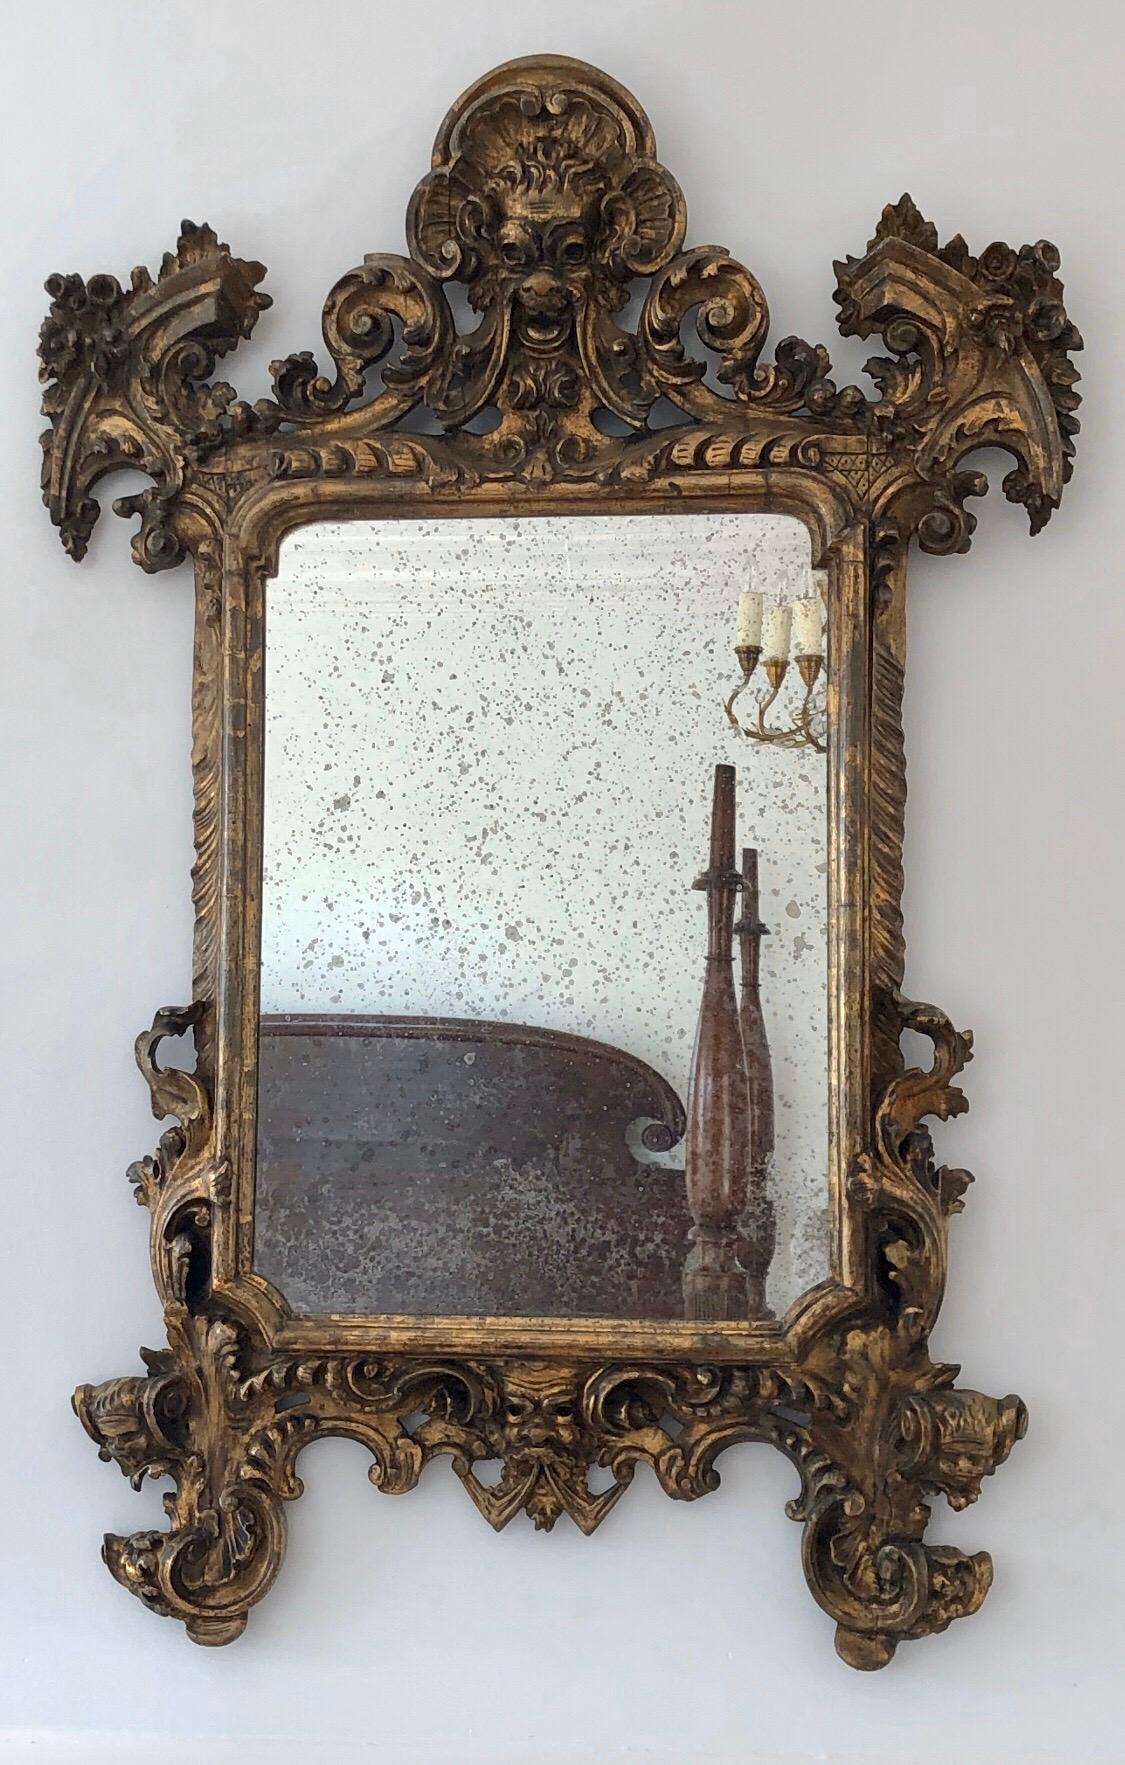 This 18th century Baroque giltwood Italian mirror has a theatrical face on the crest with swags flowing to the cornucopia corners. The bold frame has scrolls that are classically carved. The bottom rail also has a Theatrical Face. The mirror raises